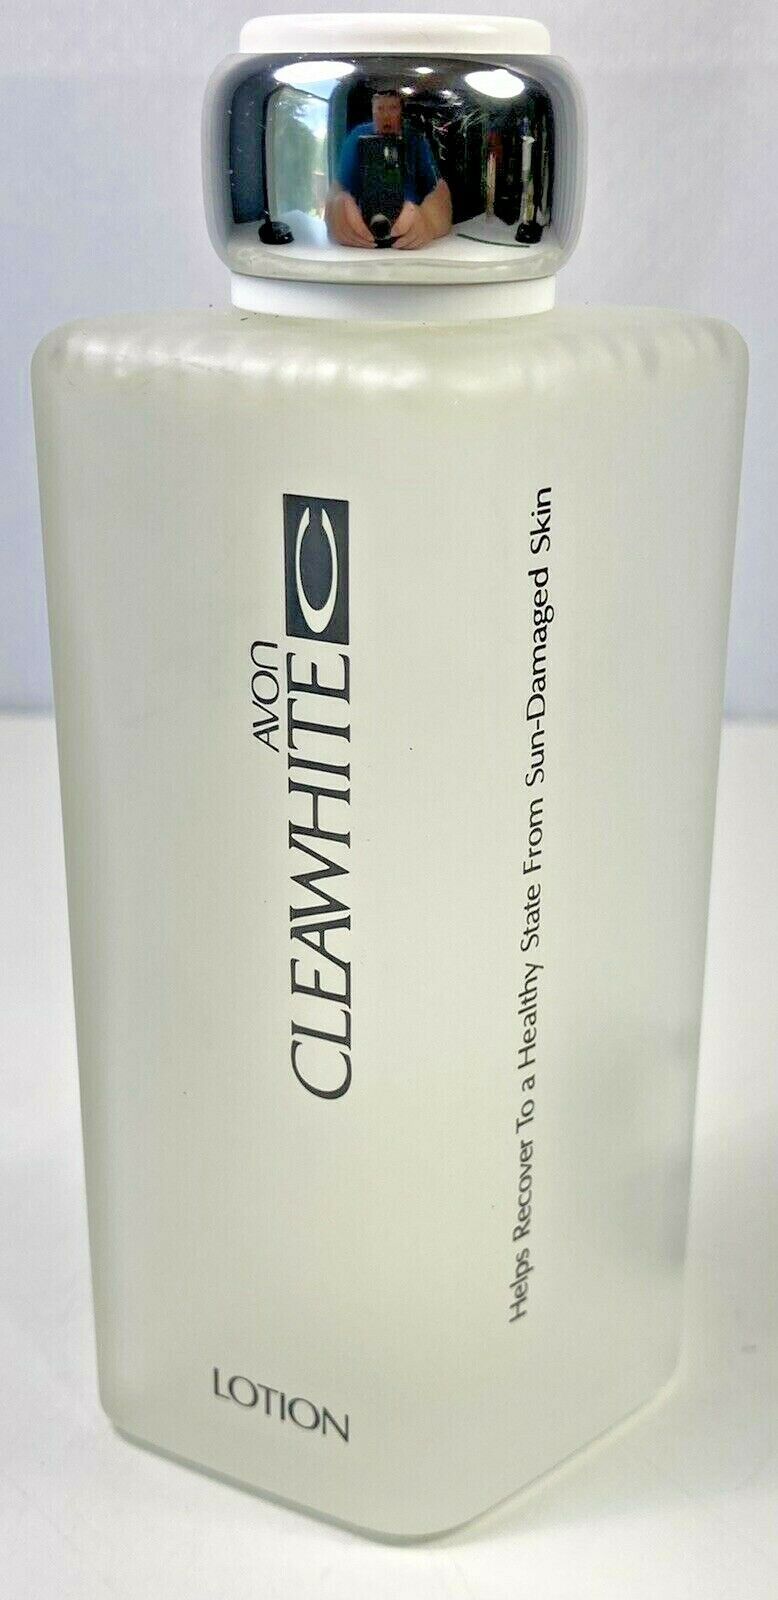 Primary image for Cleawhite Lotion Face Care Sun Damaged Skin Asian Beauty Treatment Avon China